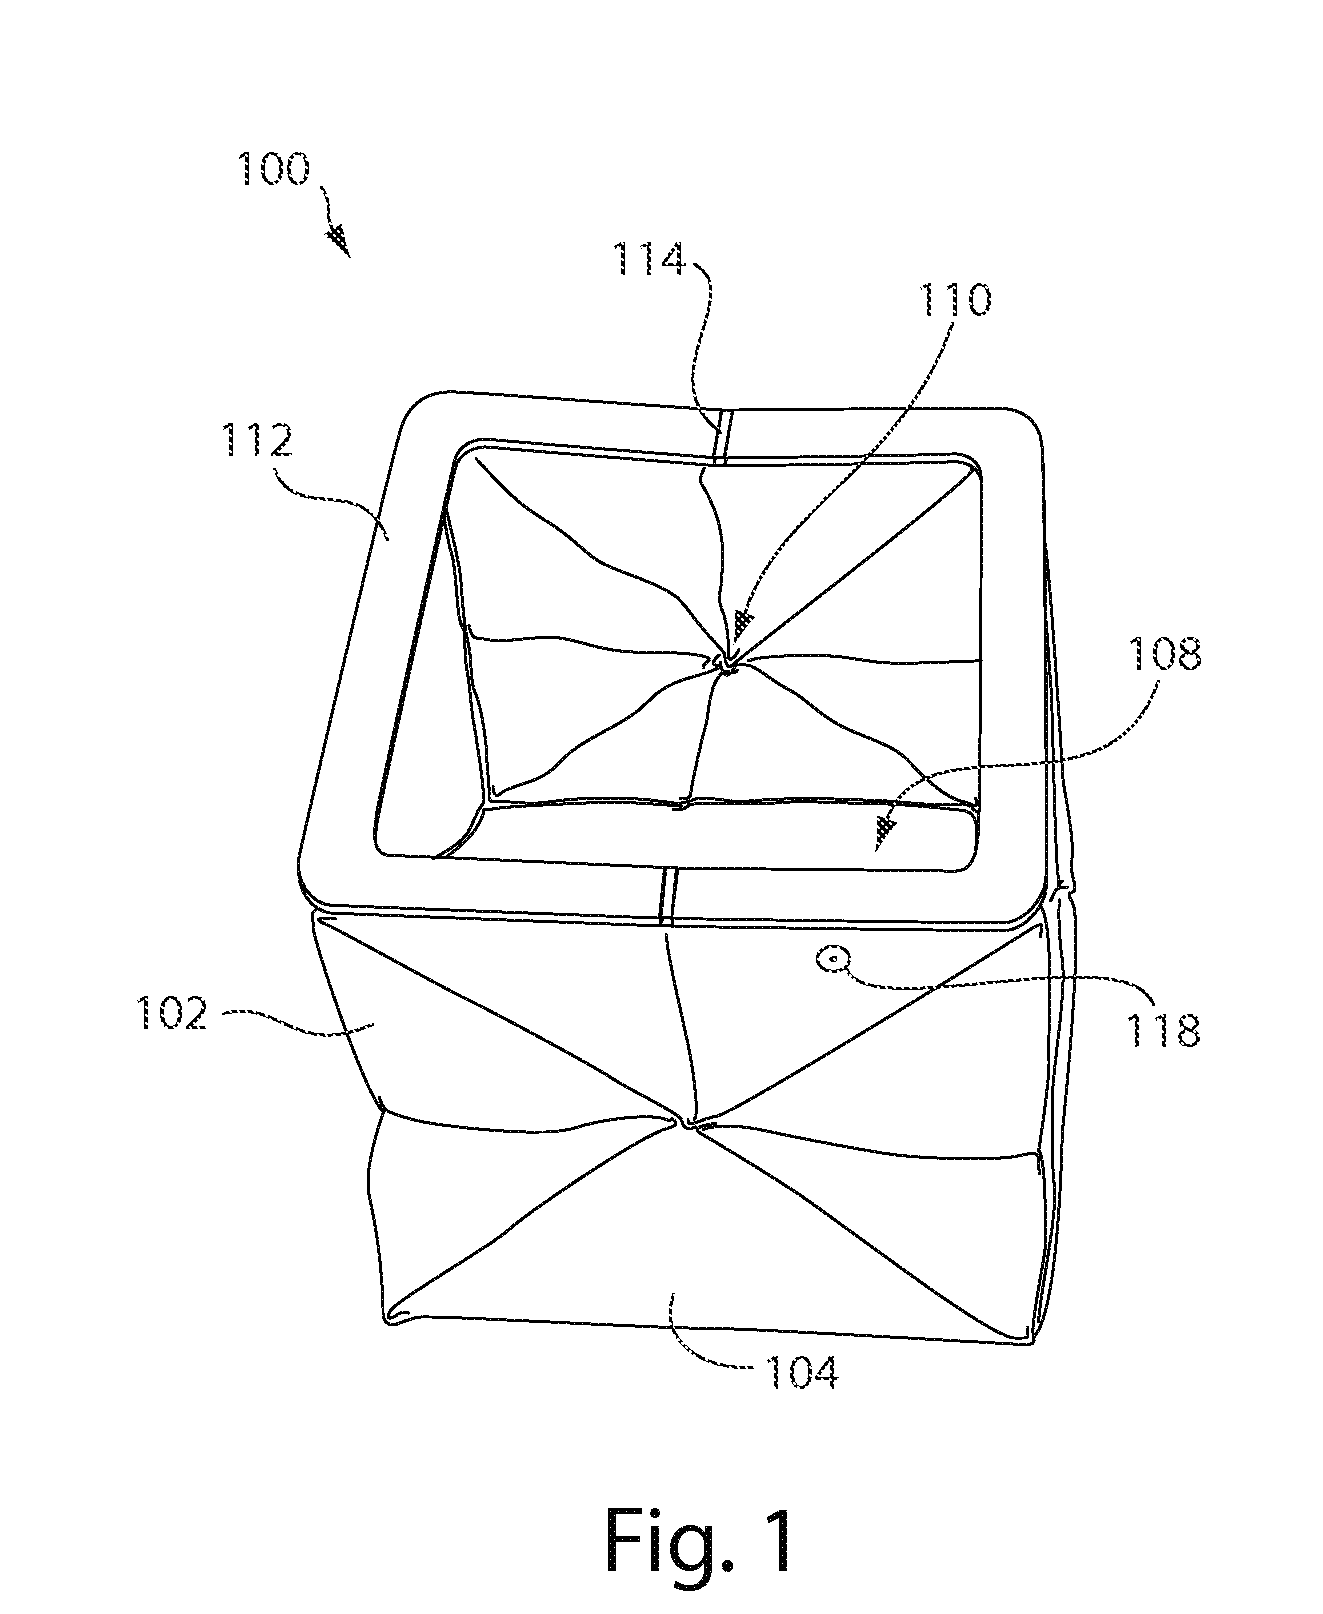 Systems and methods for waste disposal using a disposal bag with a rectangular frame